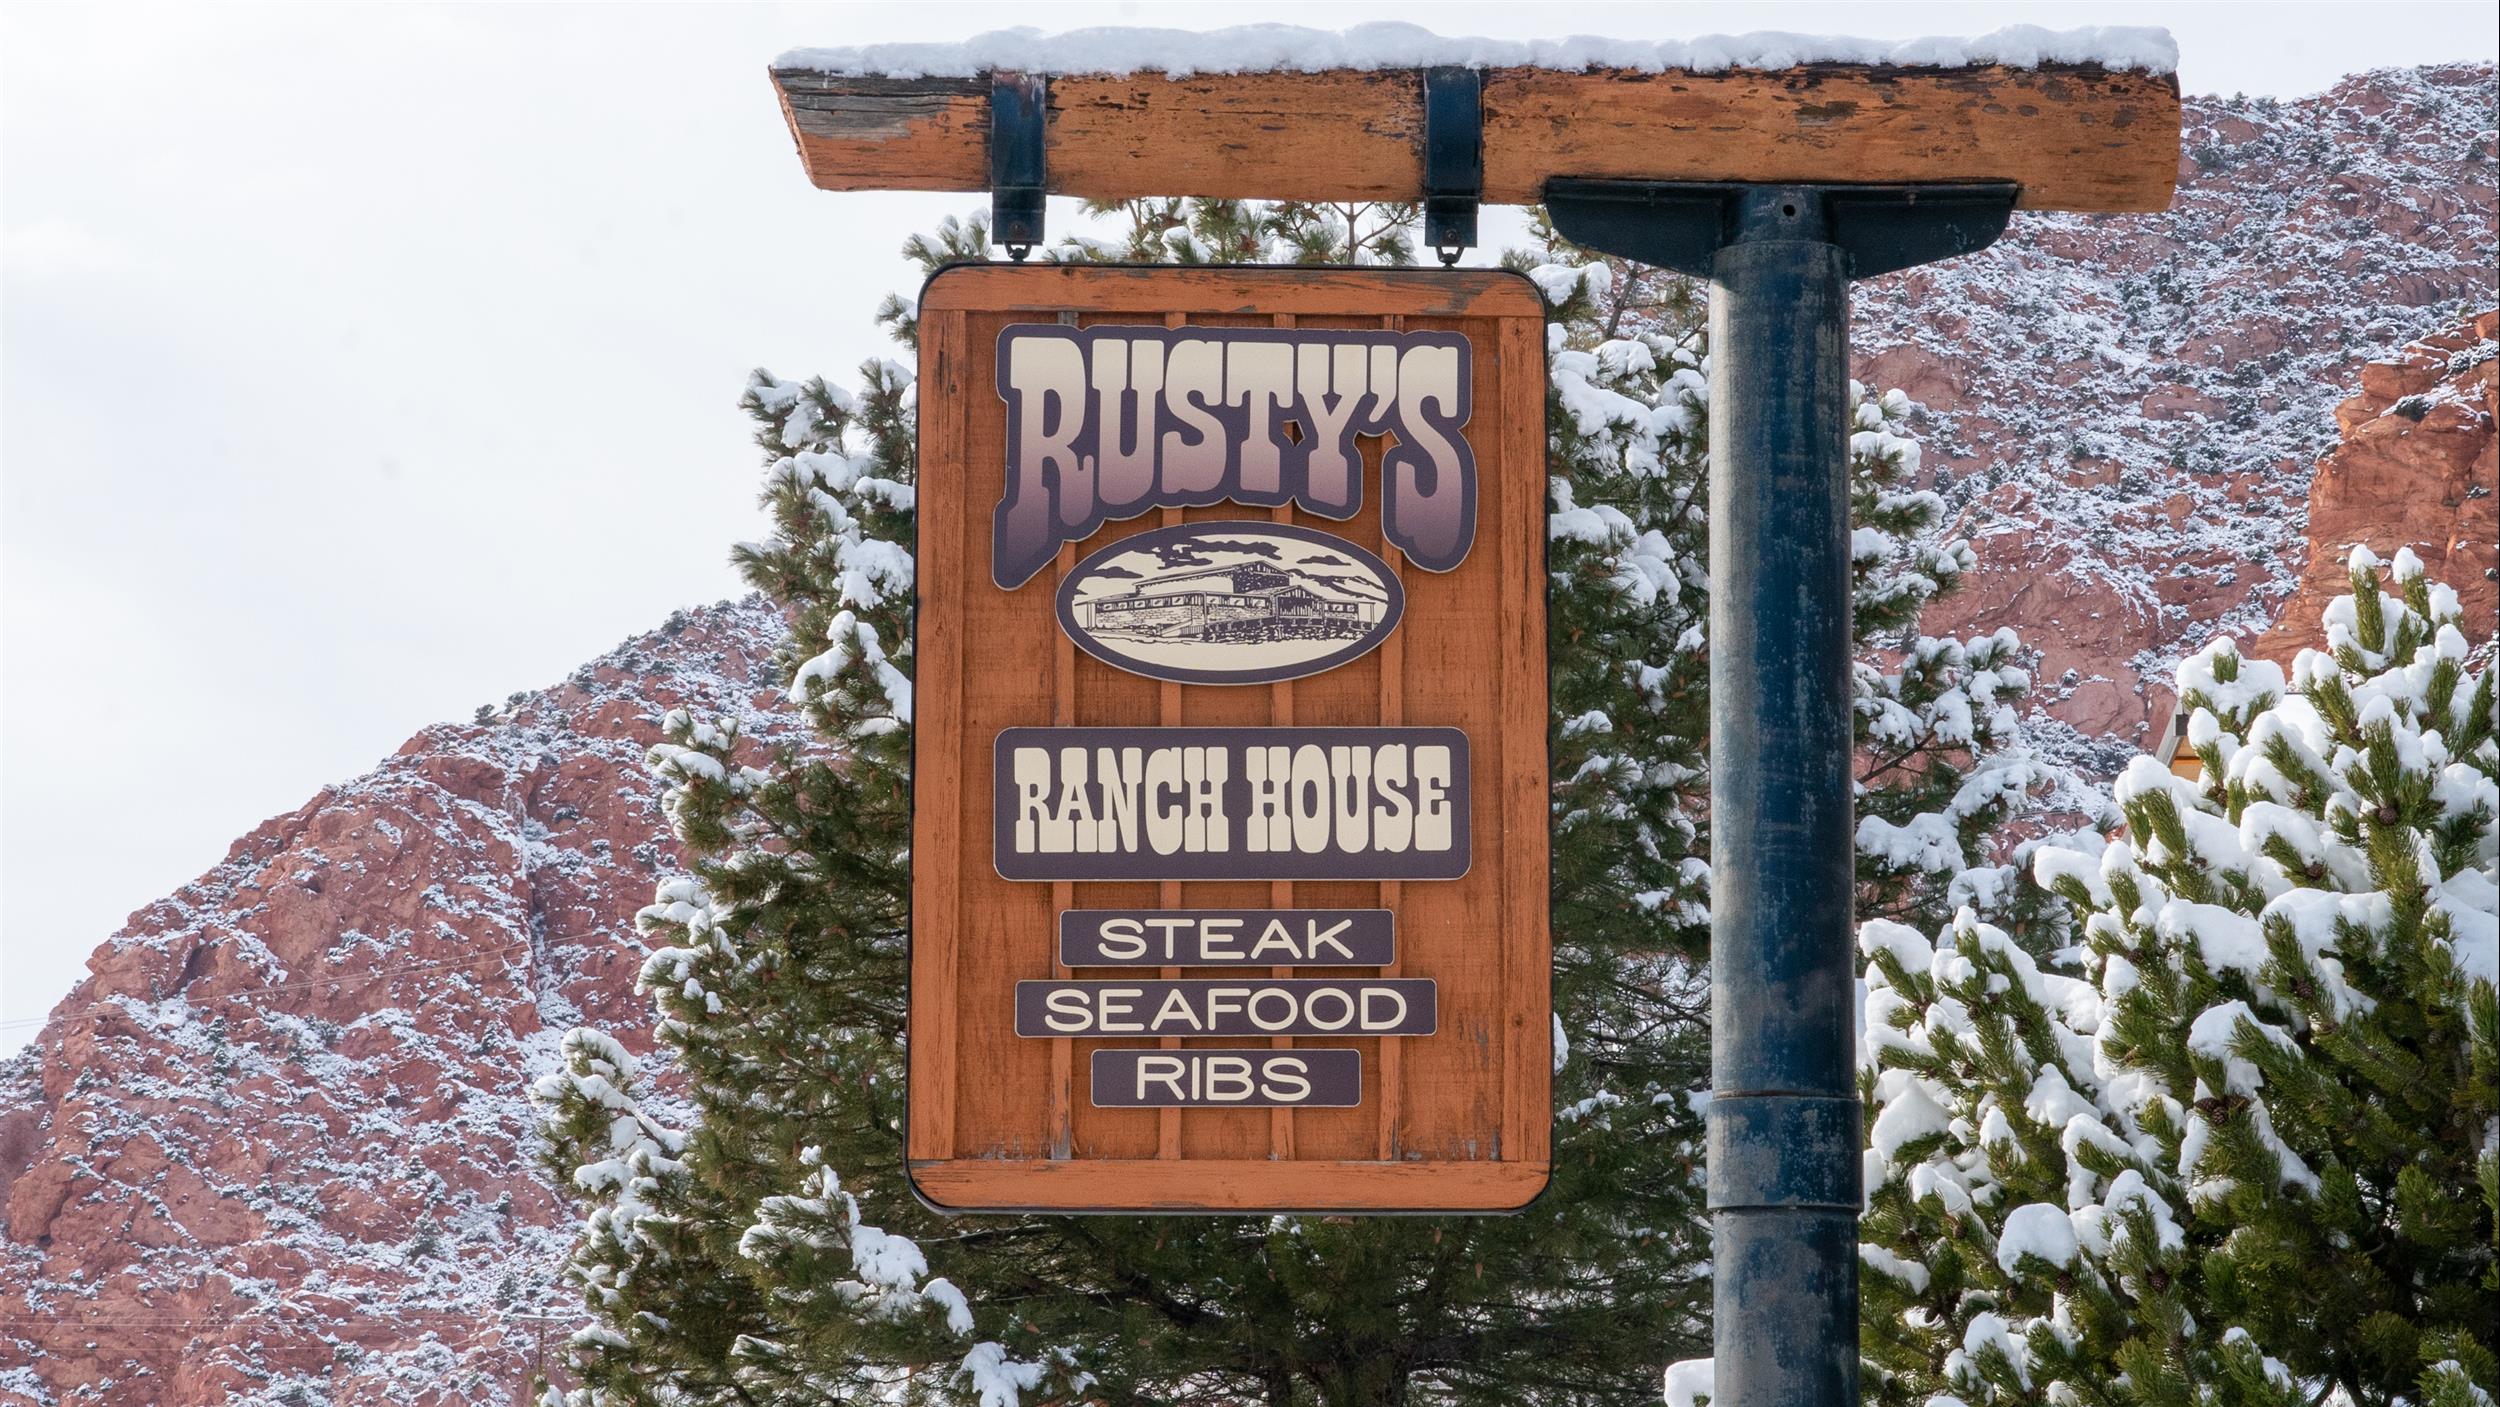 Rusty's Ranch House and Steaks